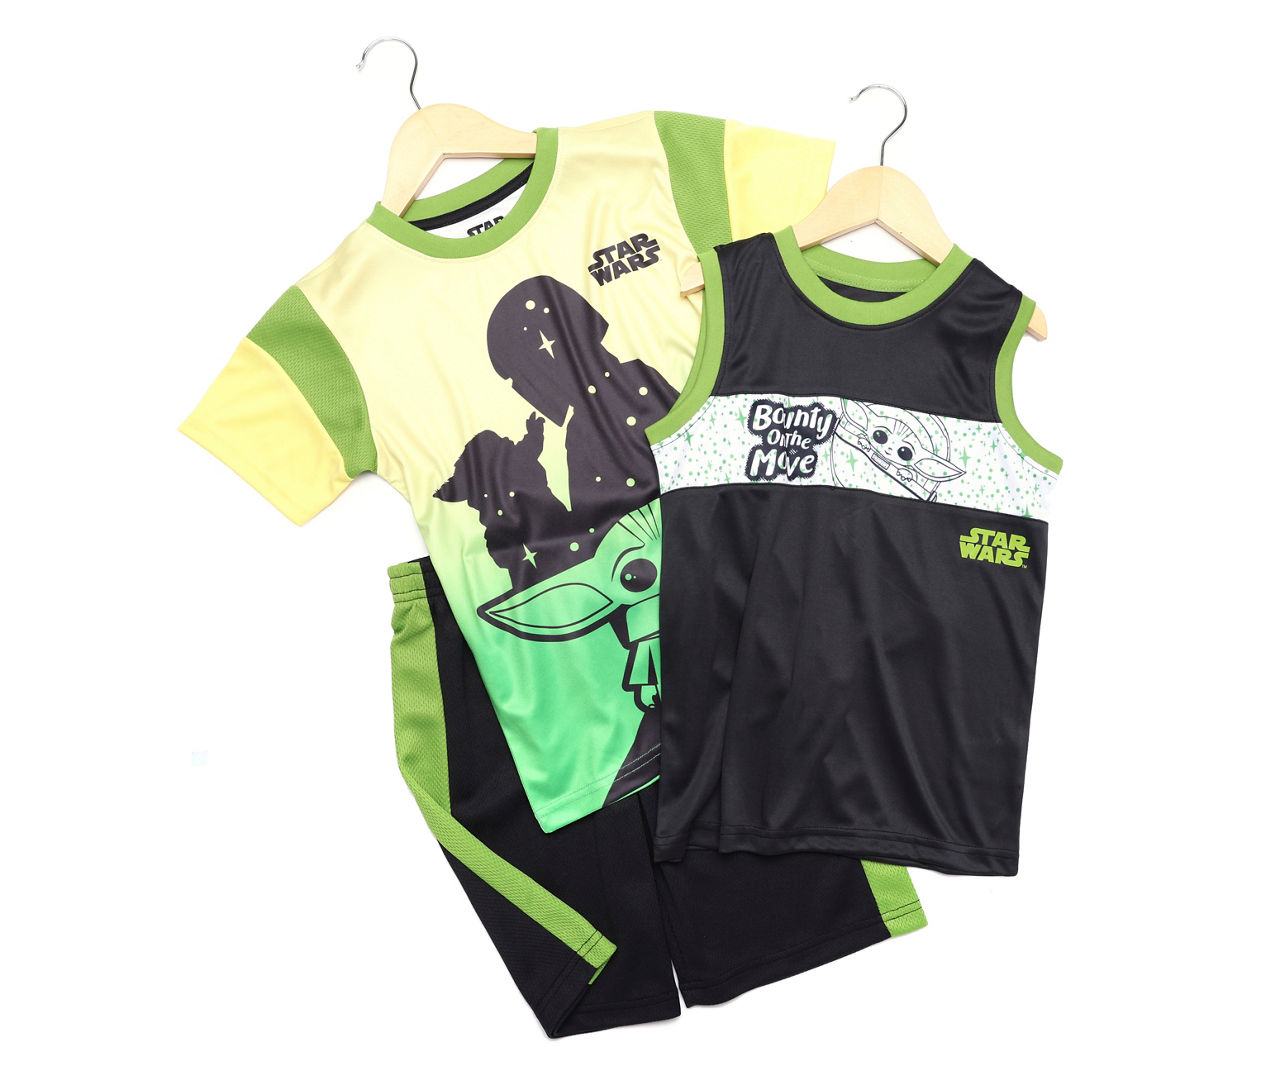 Kids' Size 5/6 Green & Black Grogu 3-Piece Performance Outfit